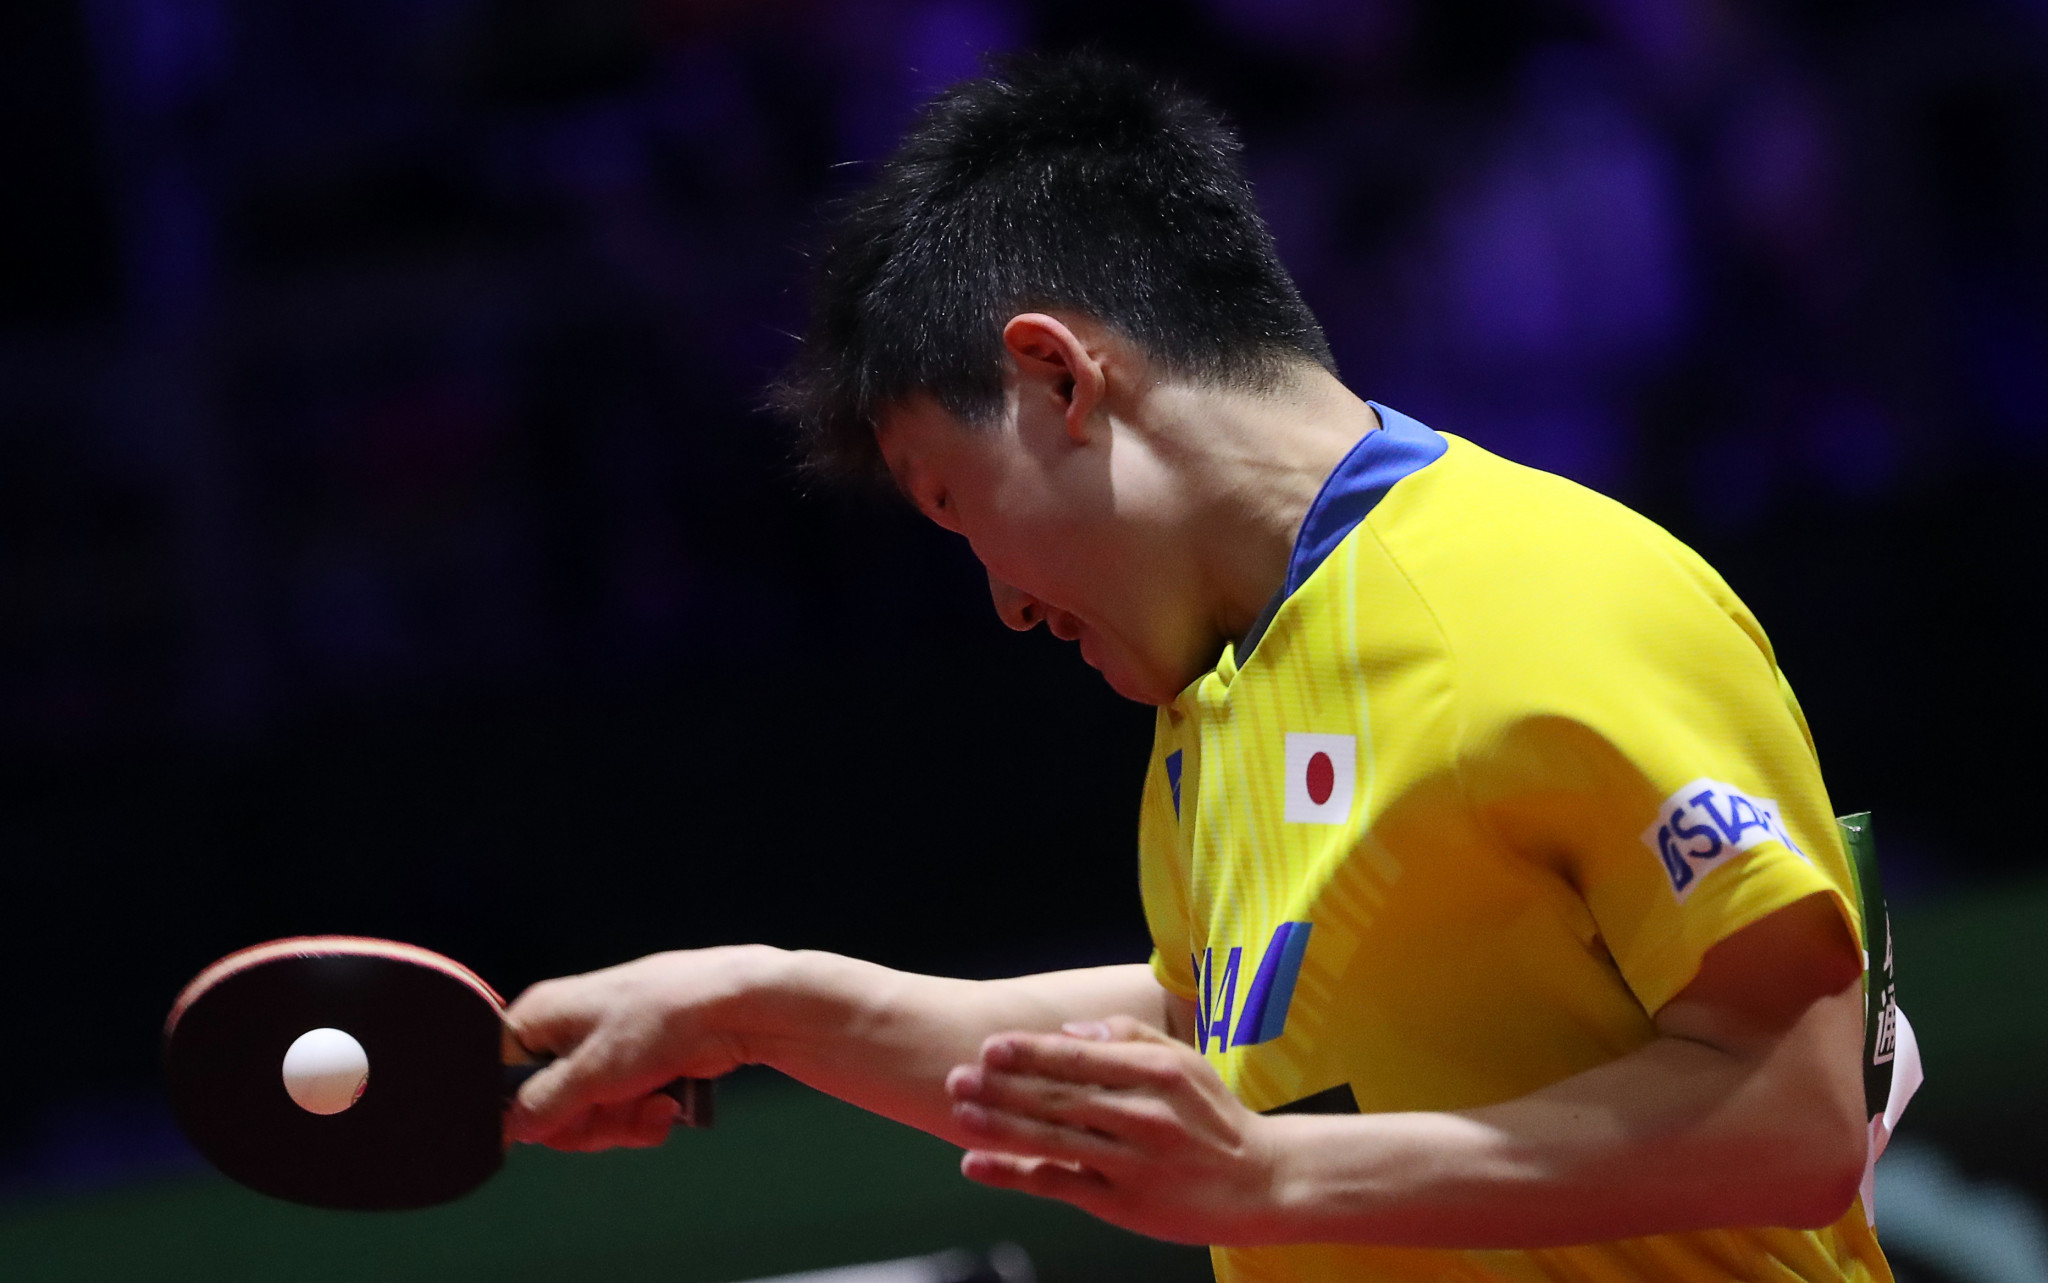 Japan's Tomokazu Harimoto is the men's singles top seed for the ITTF Czech Open in Olomouc ©Getty Images